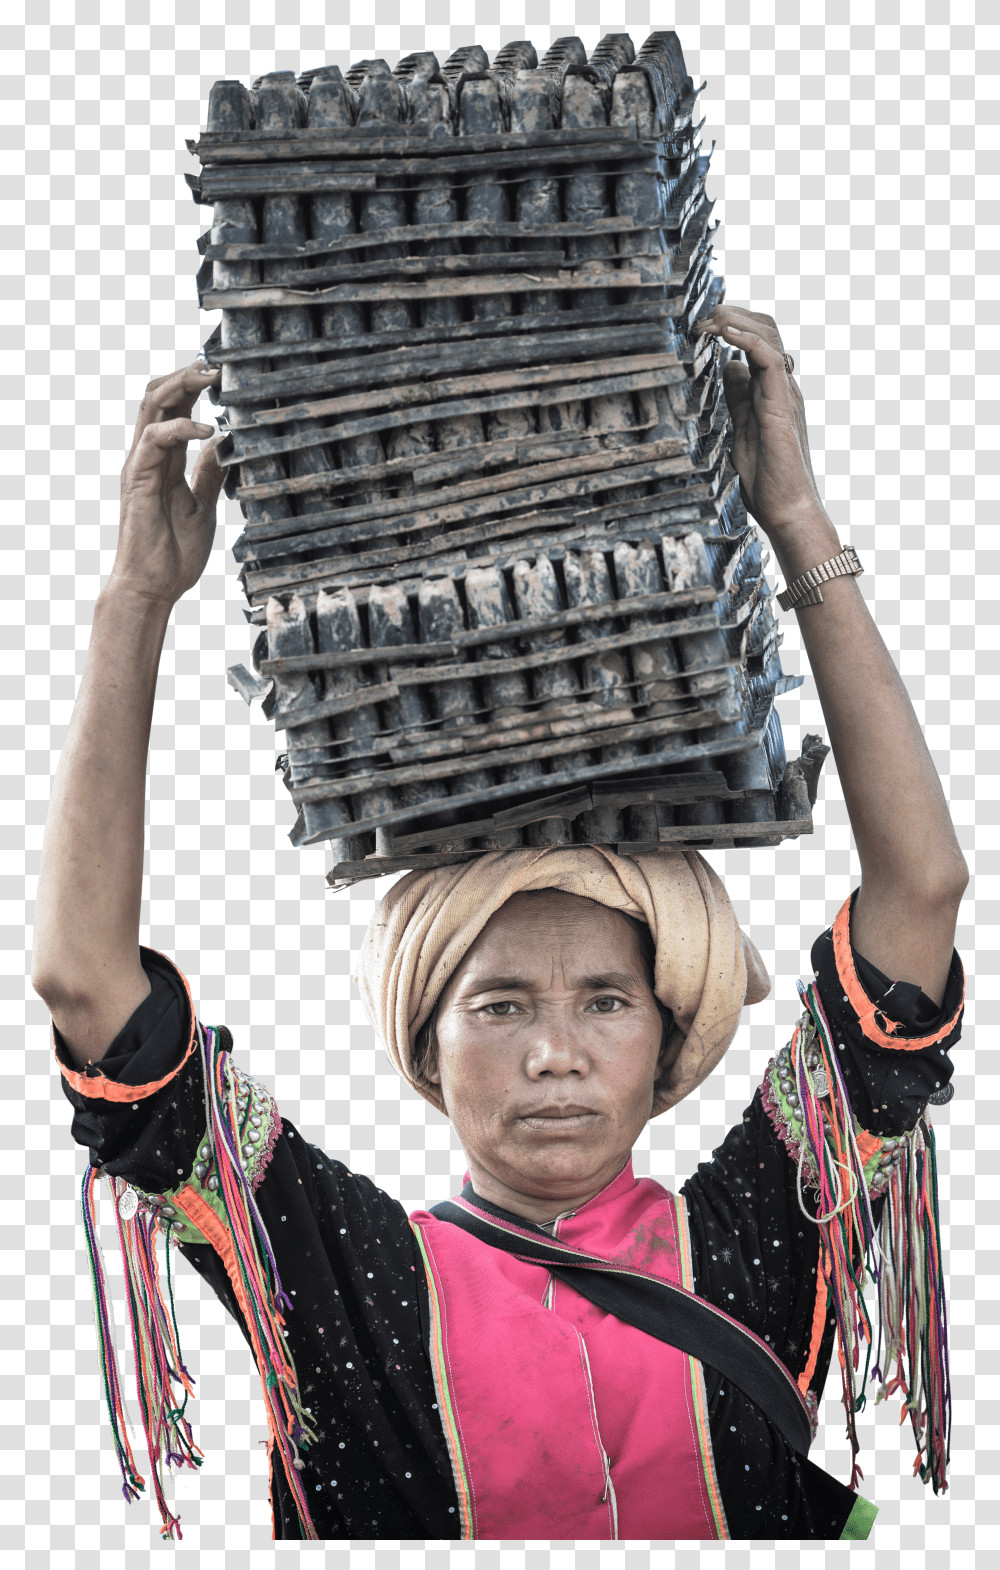 Woman Holding Paper Egg Tray Tradition Transparent Png